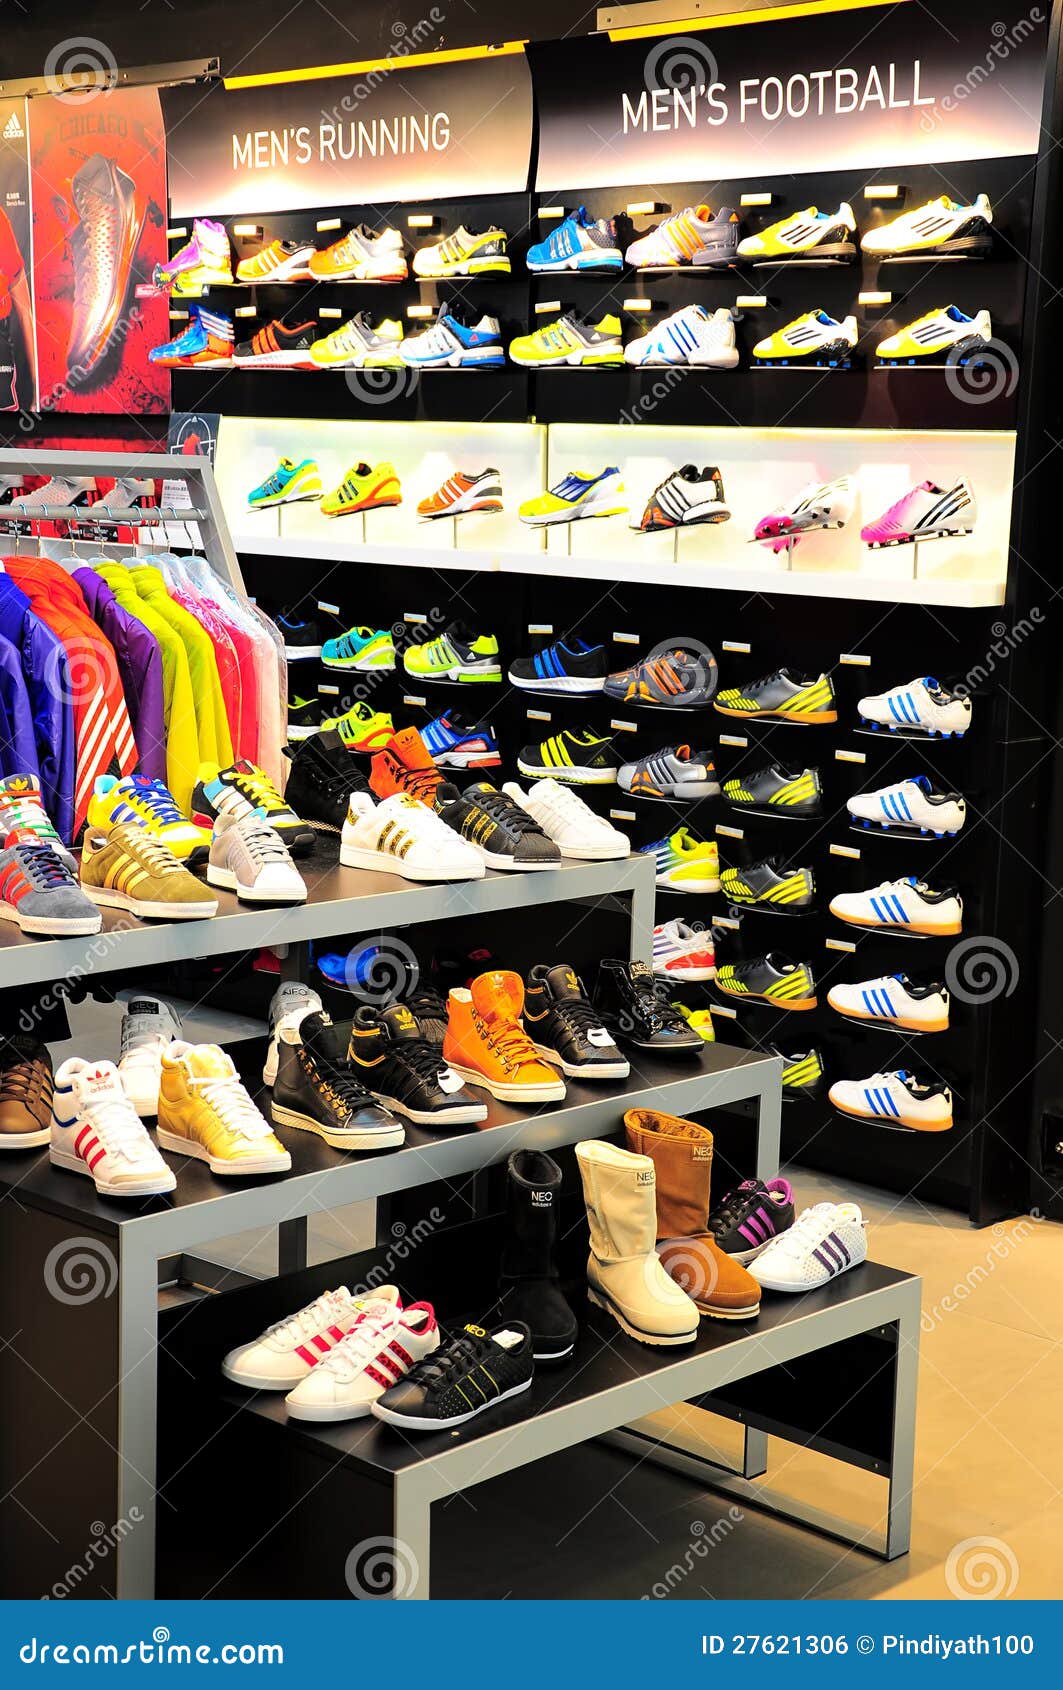 Addidas store in hong kong editorial photo. Image of shoes - 27621306